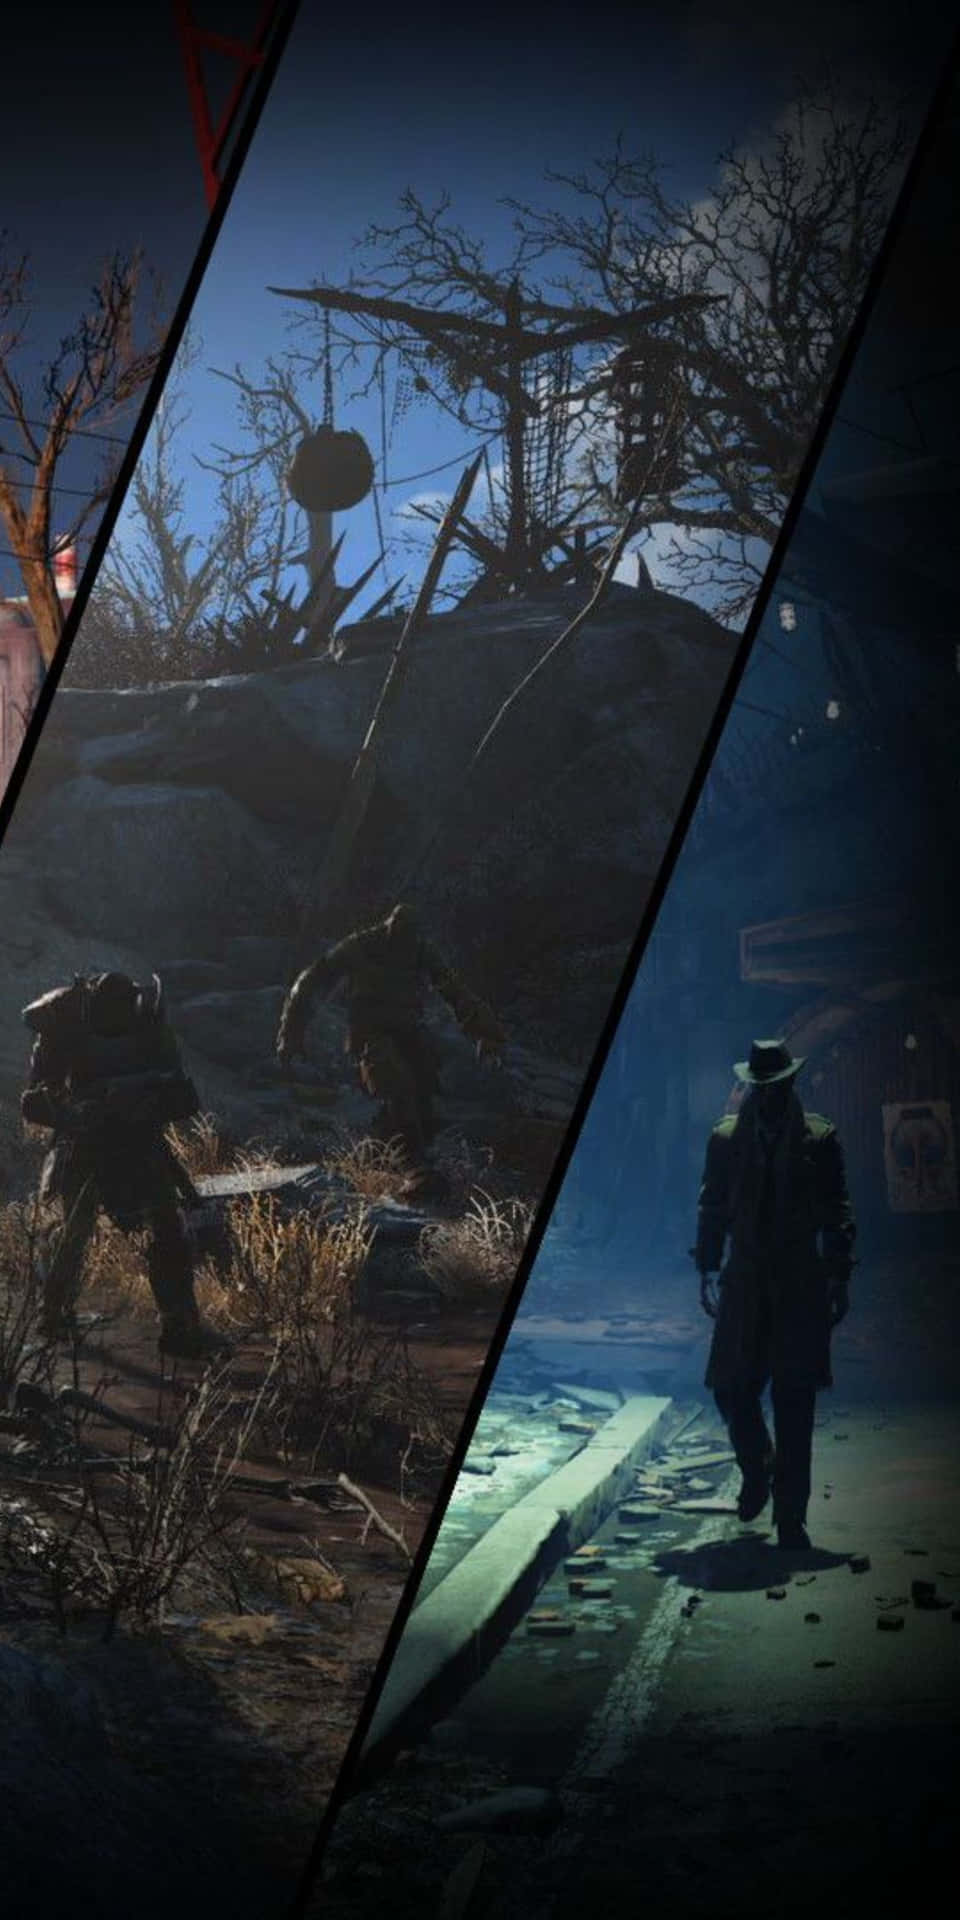 Join the fight in Fallout 76 with the Pixel 3 by your side